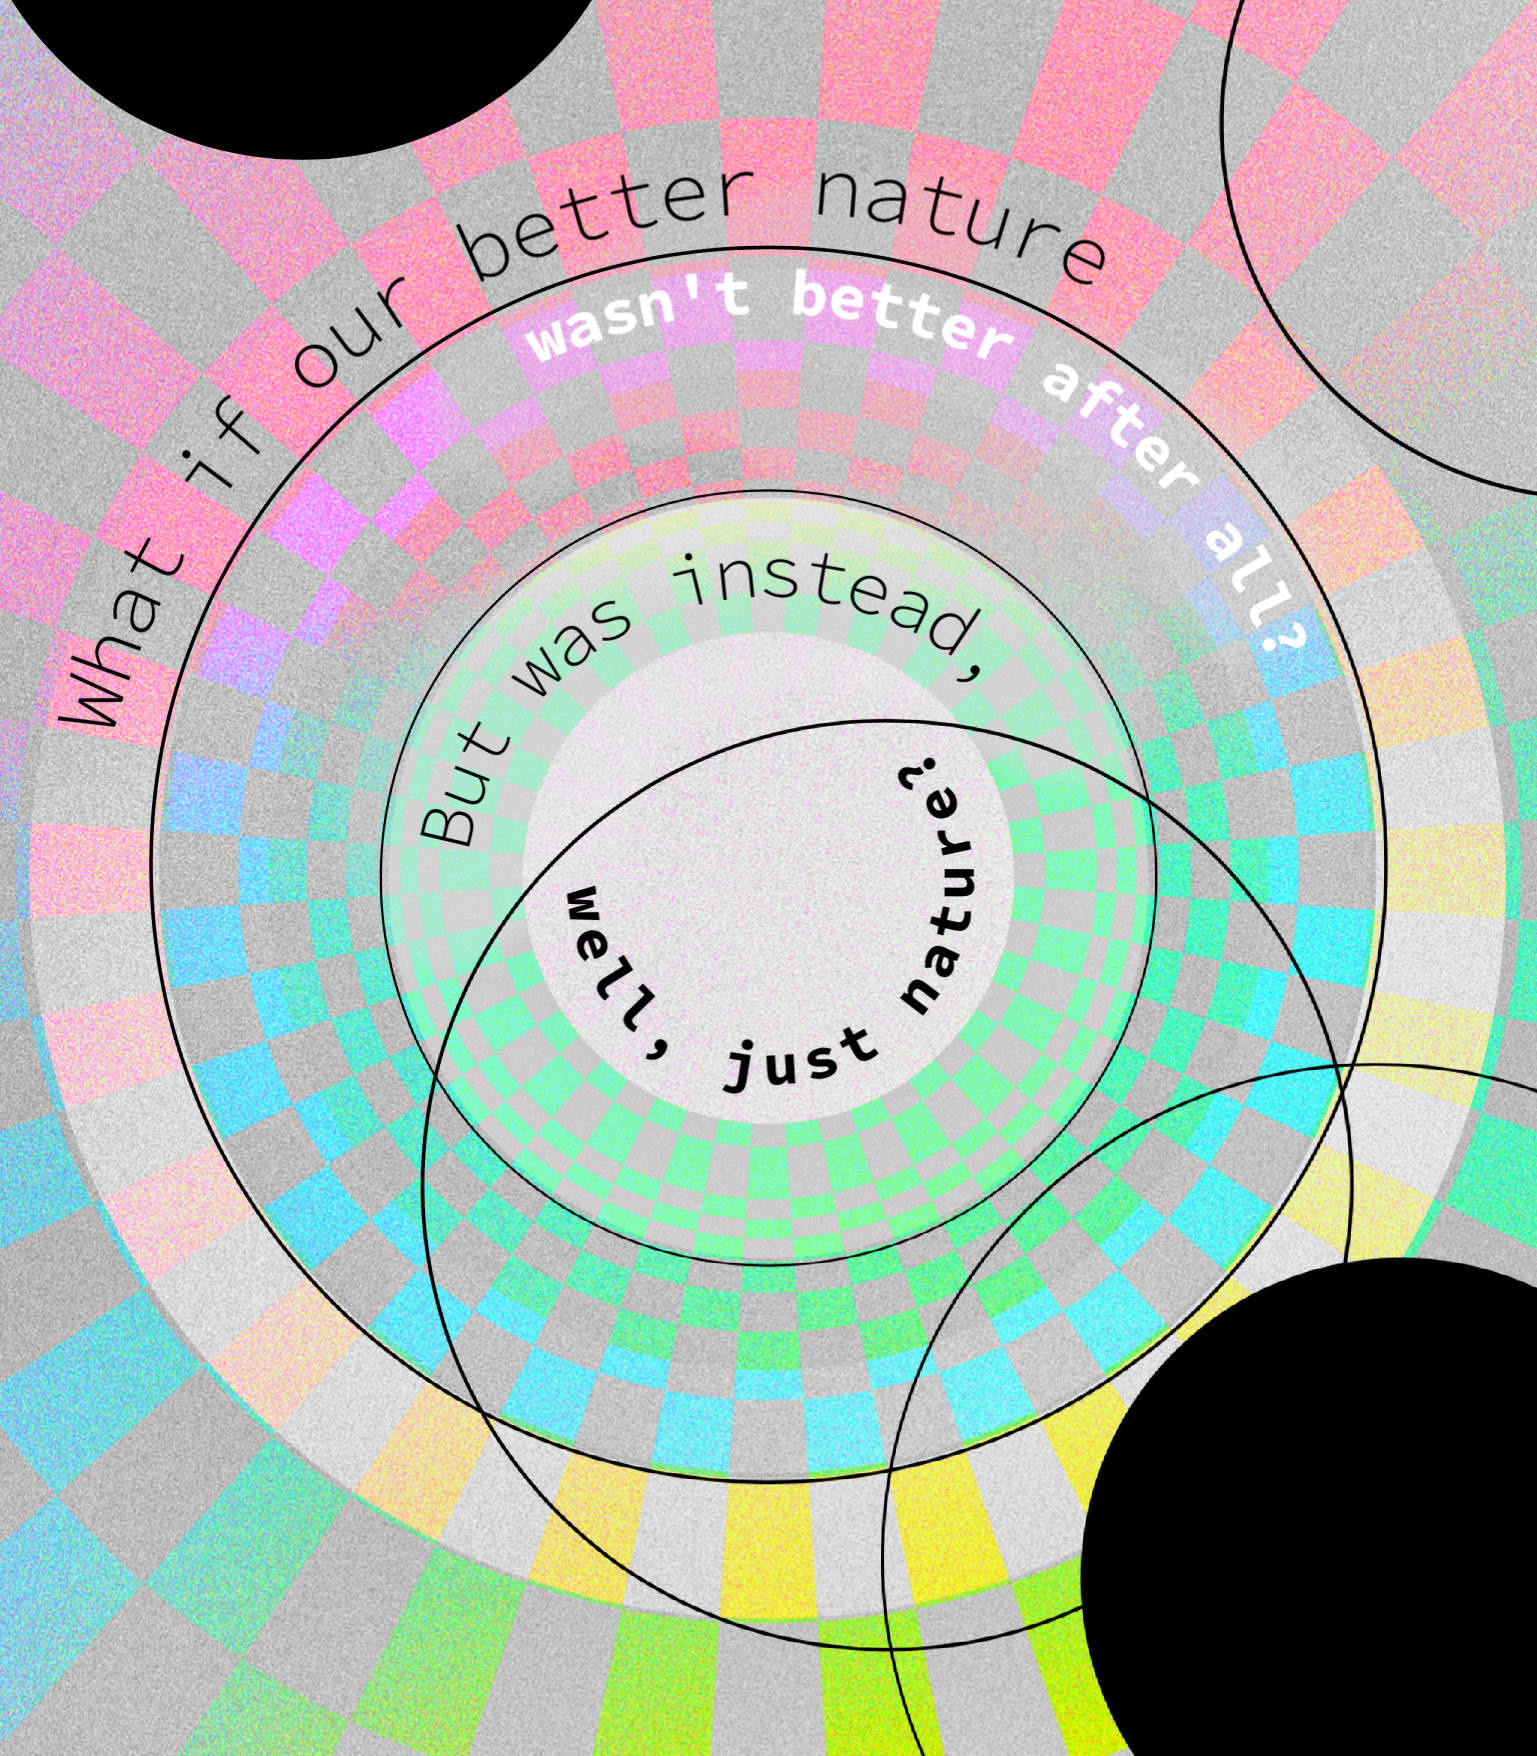 Dizzying circular patterns holding the text, "What if our better nature wasn't better after all? But was instead, well, just nature?"